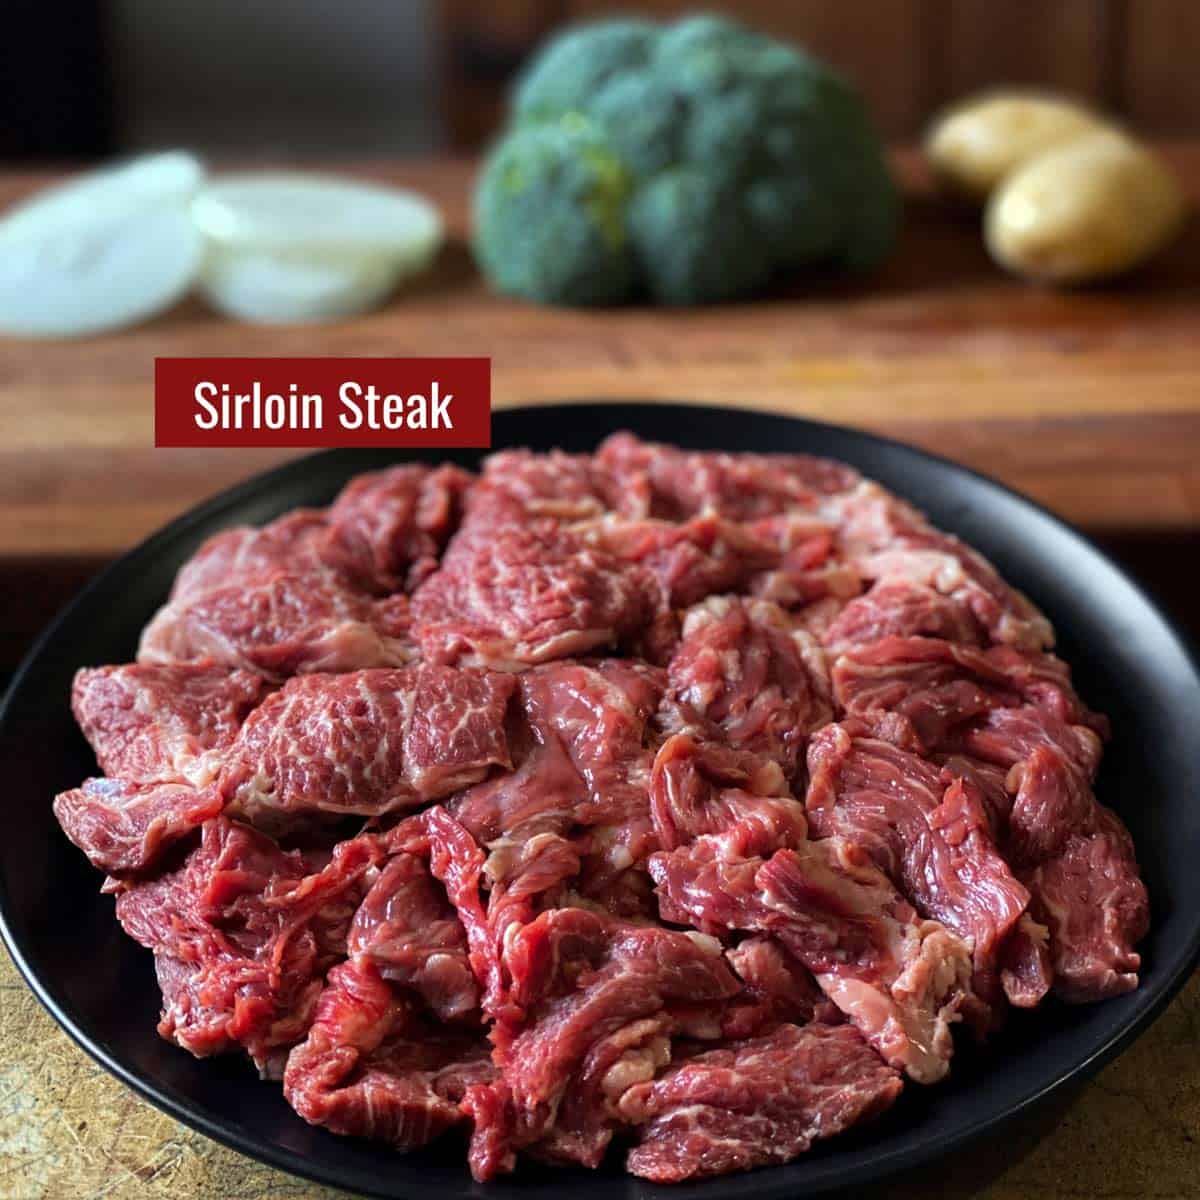 Cut up sirloin meat on a black plate.